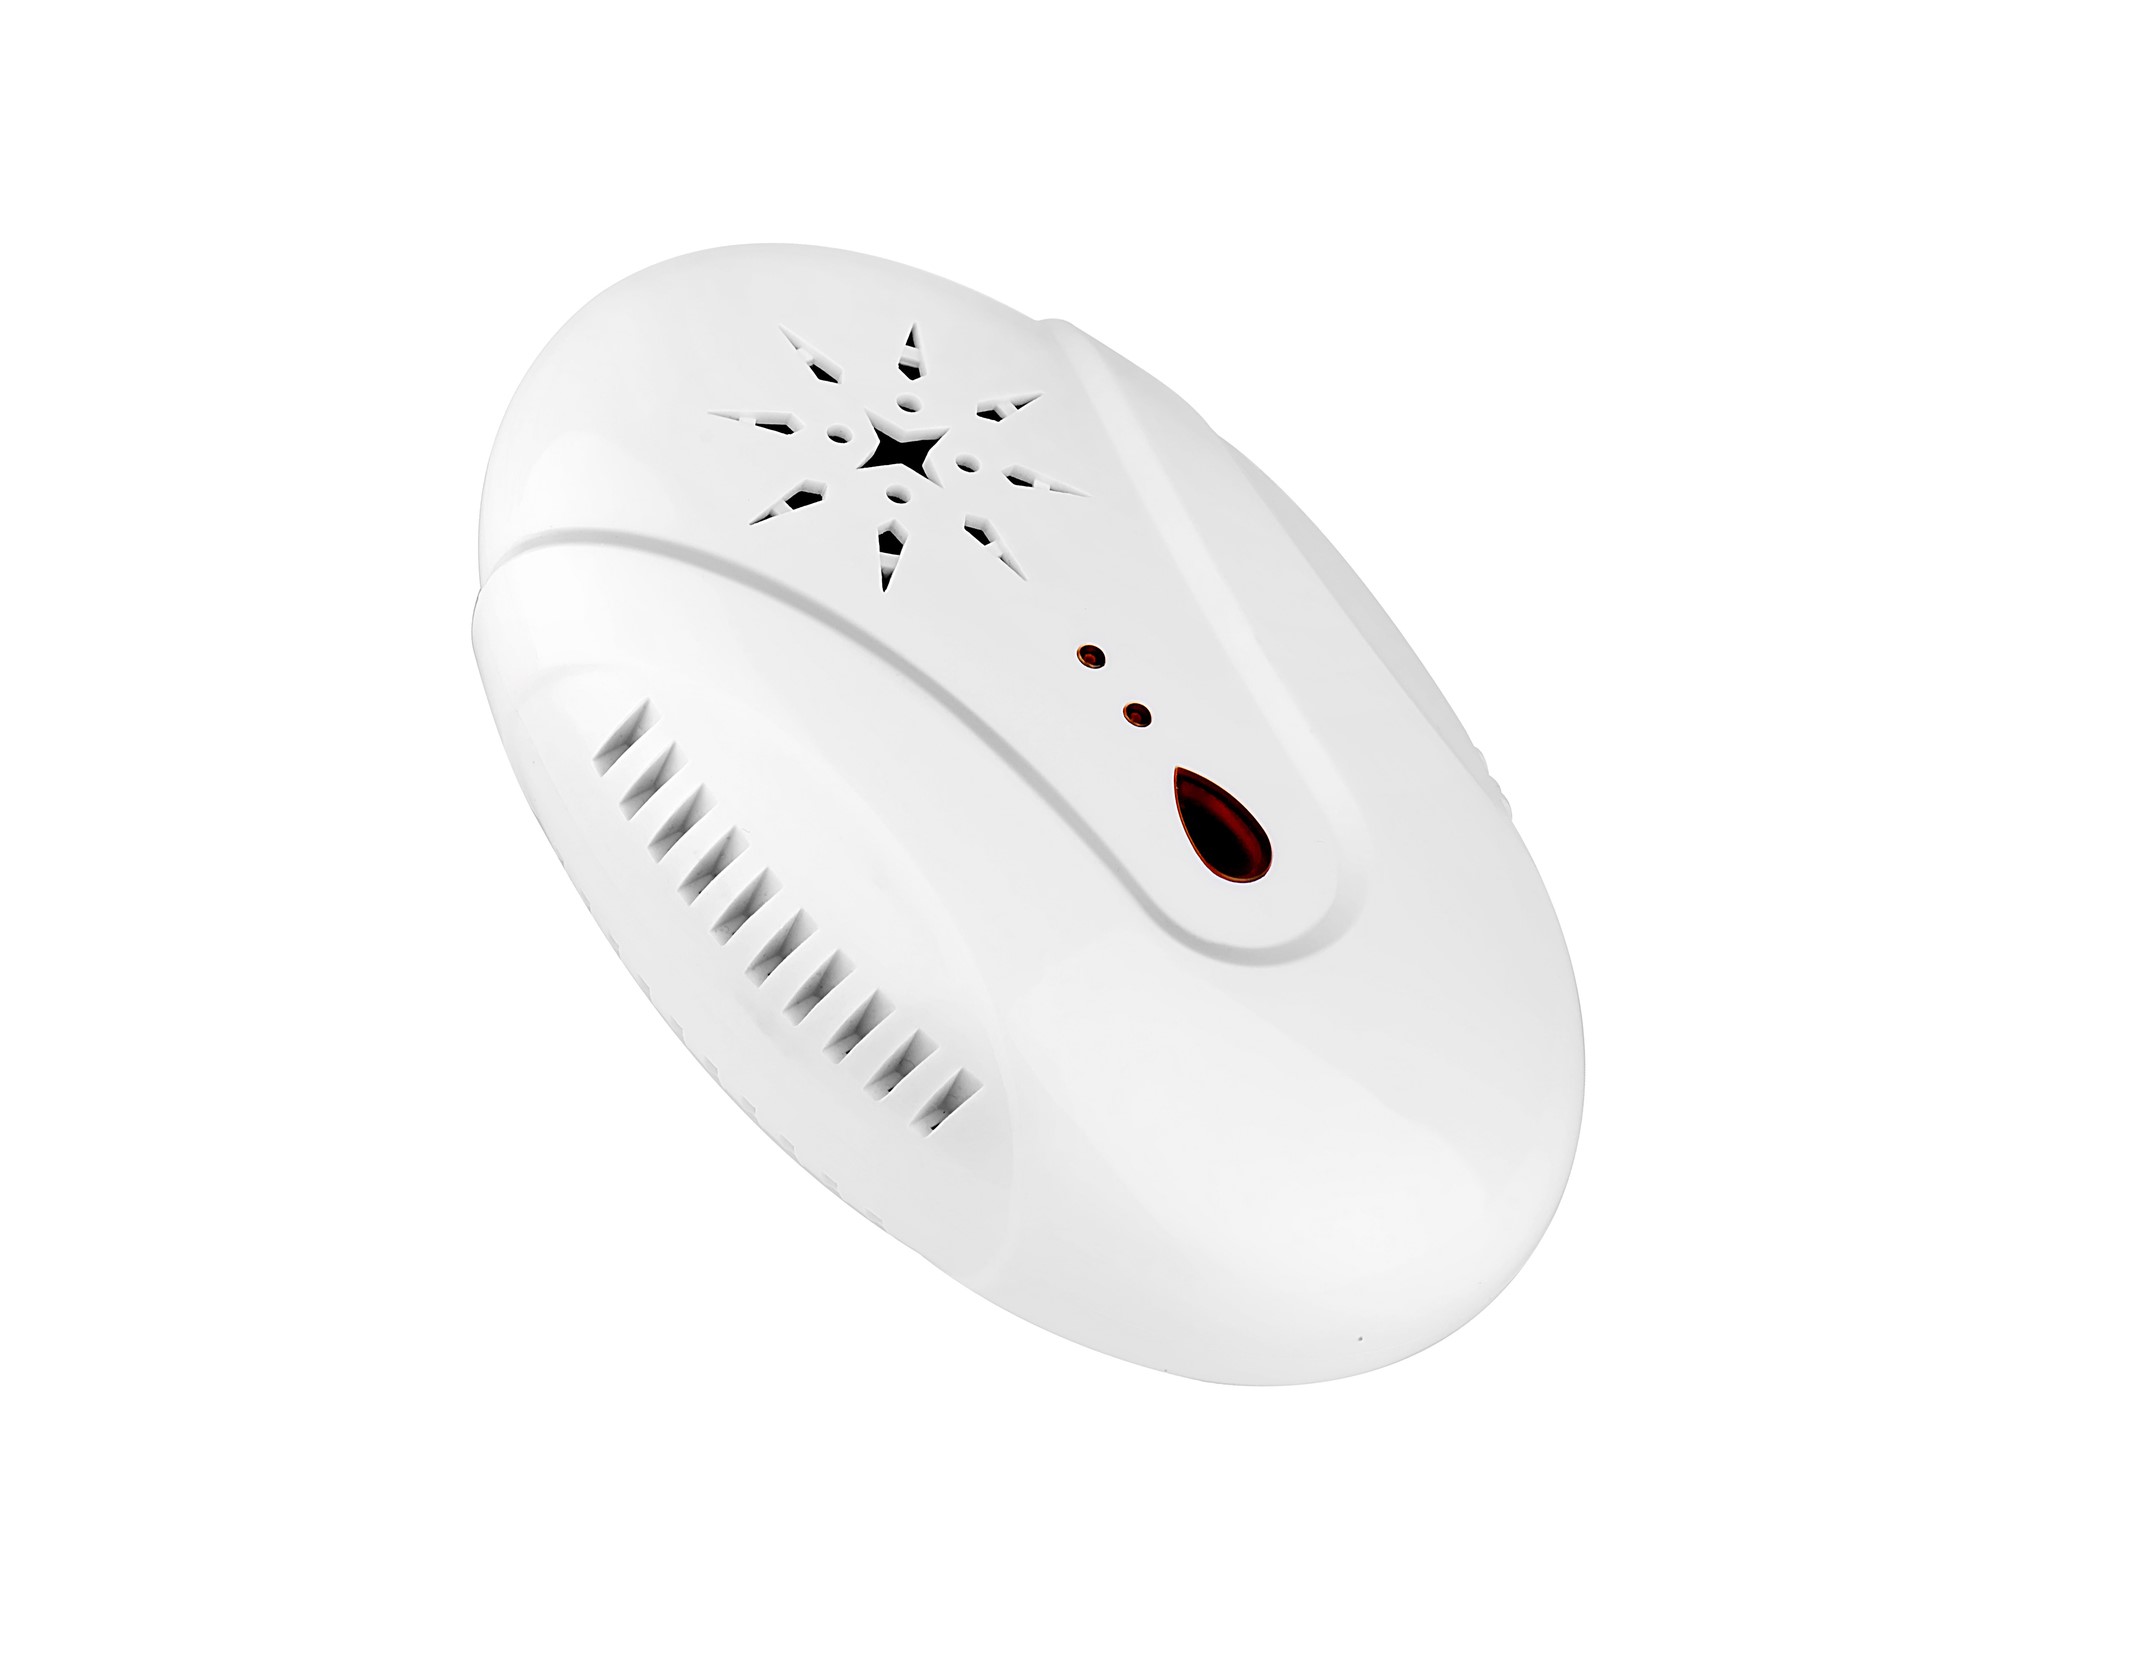 Ultrasonic Pest Repeller Electronic Rat Mice Bug Anti Mosquito Pest Control Reject Devices